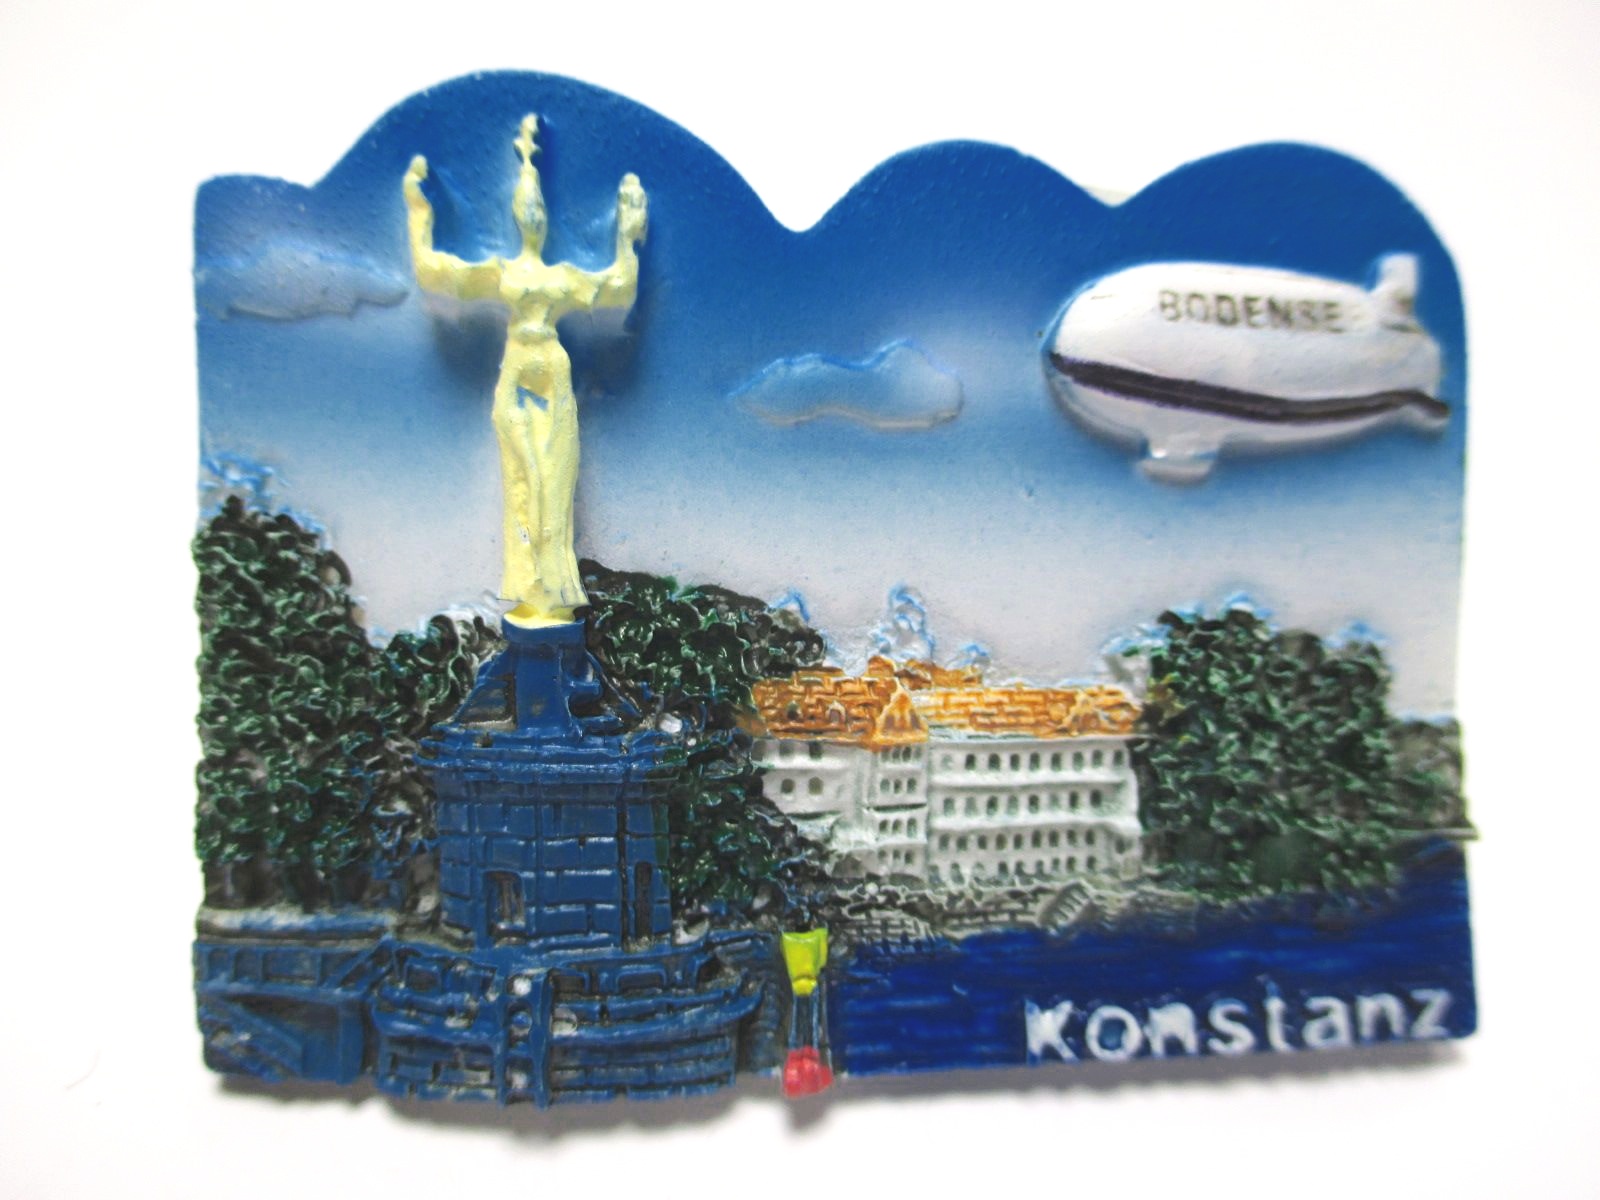 Konstanz Bodensee Poly Magnet Souvenir Germany Zeppelin Imperia Statue 